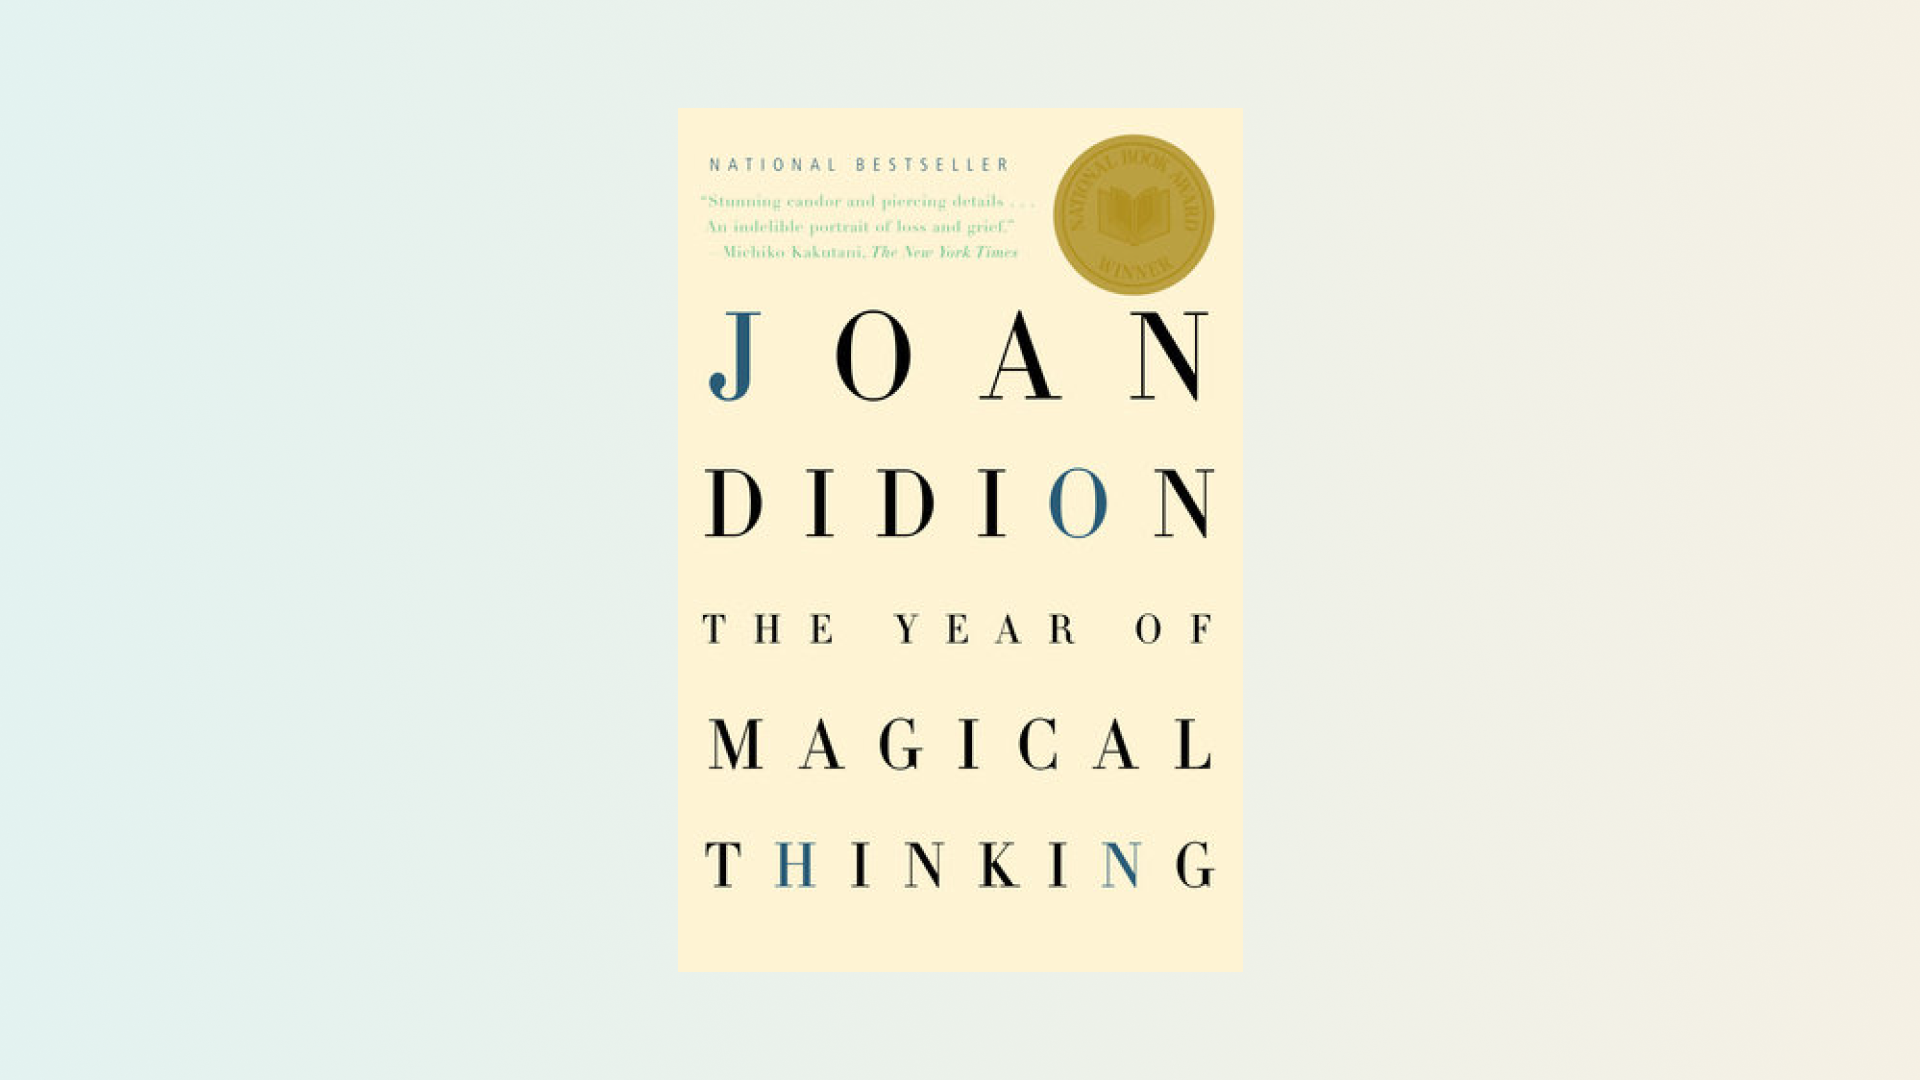 “The Year of Magical Thinking” by Joan Didion